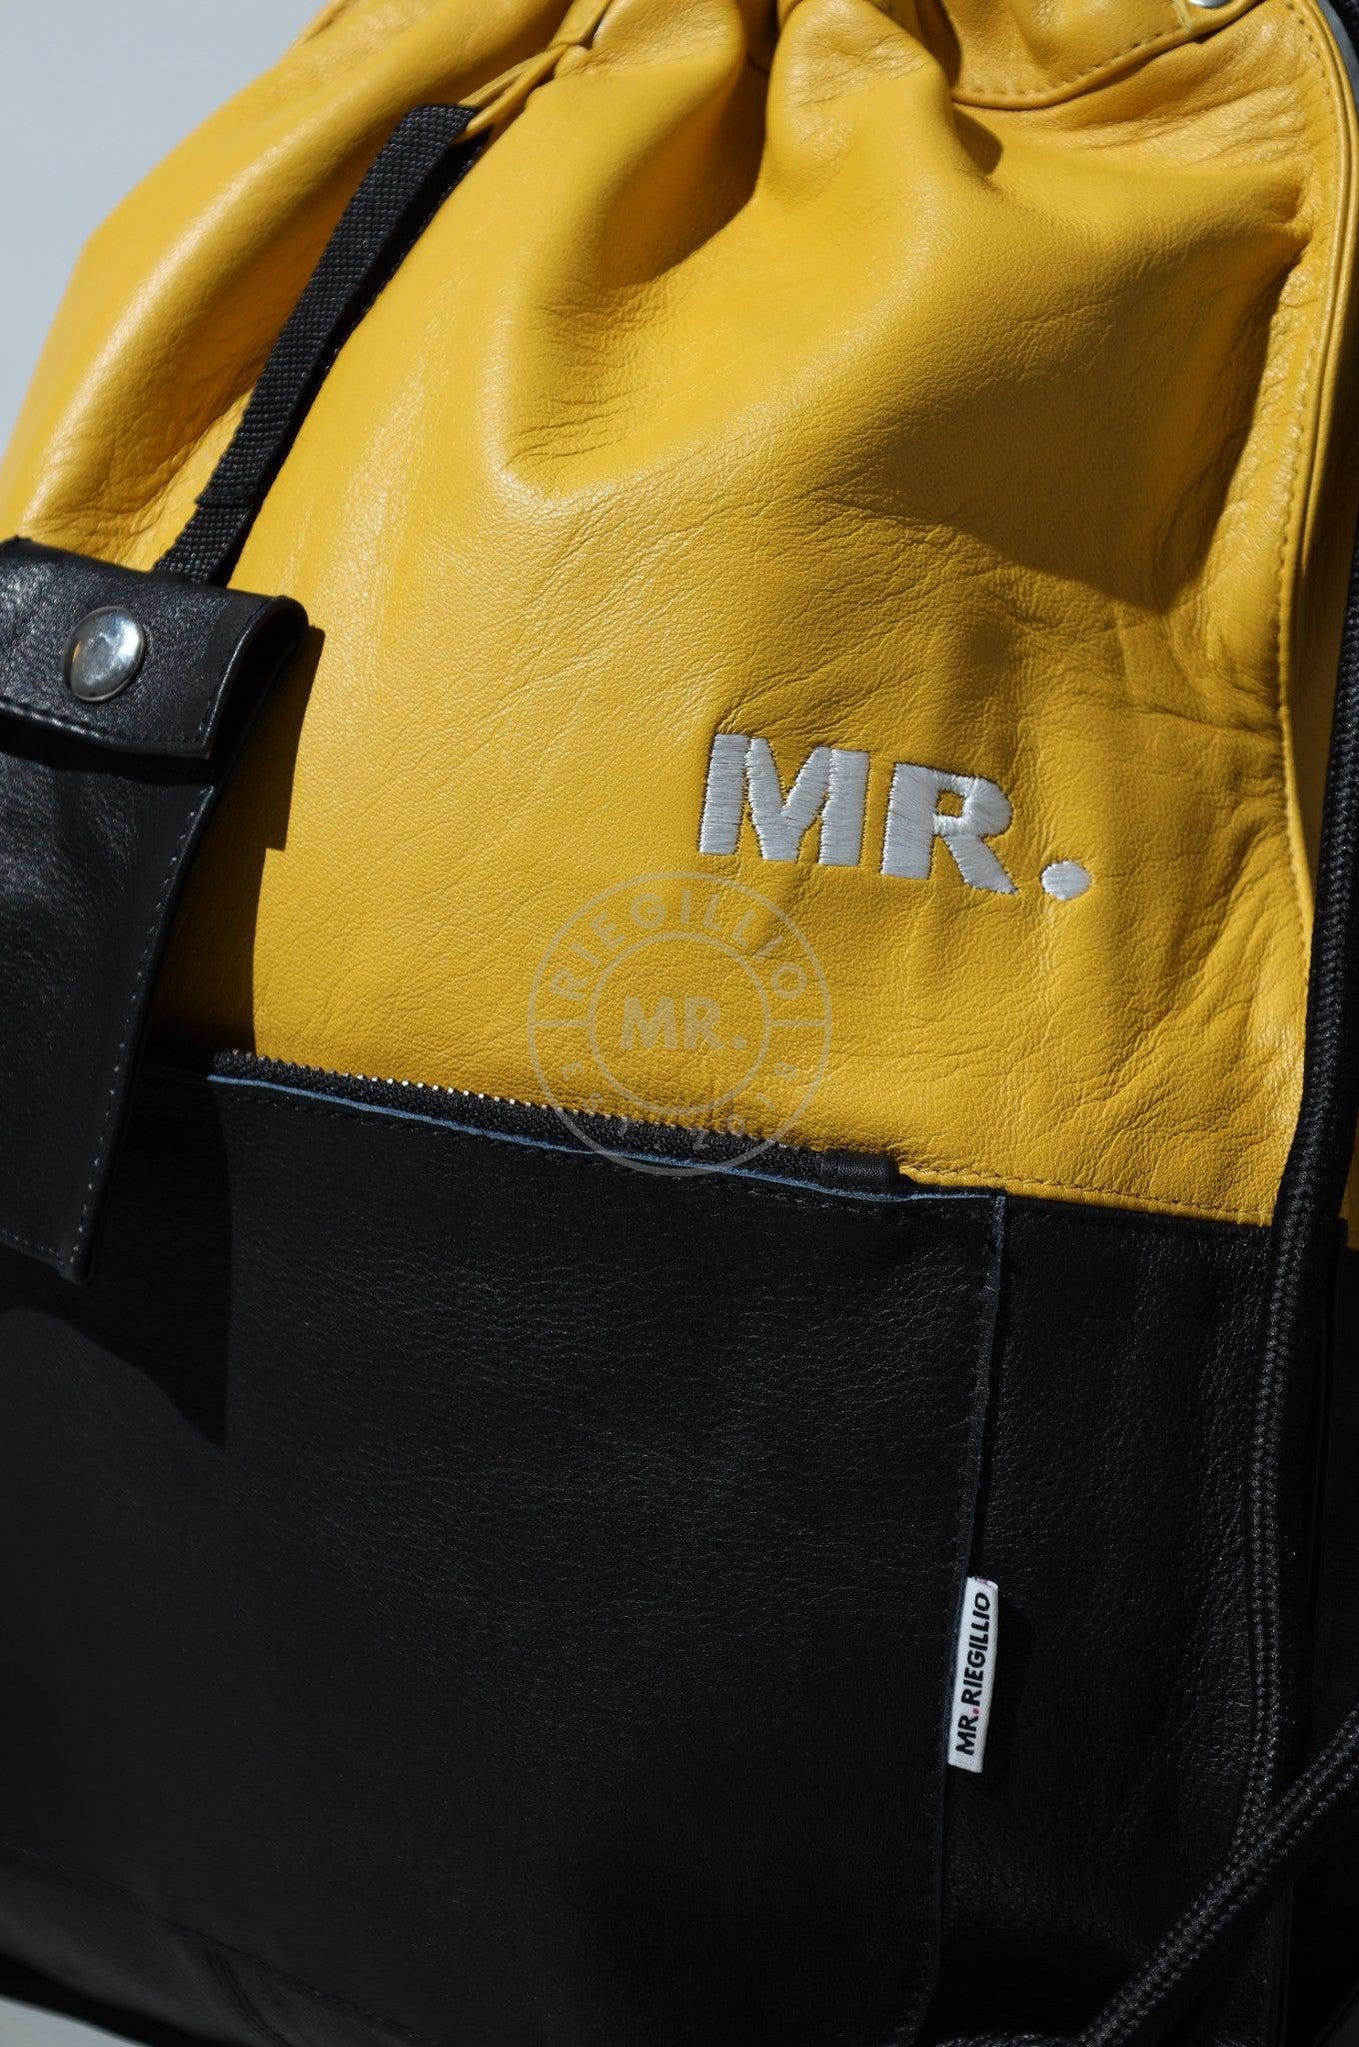 Leather Backpack Black - Yellow at MR. Riegillio